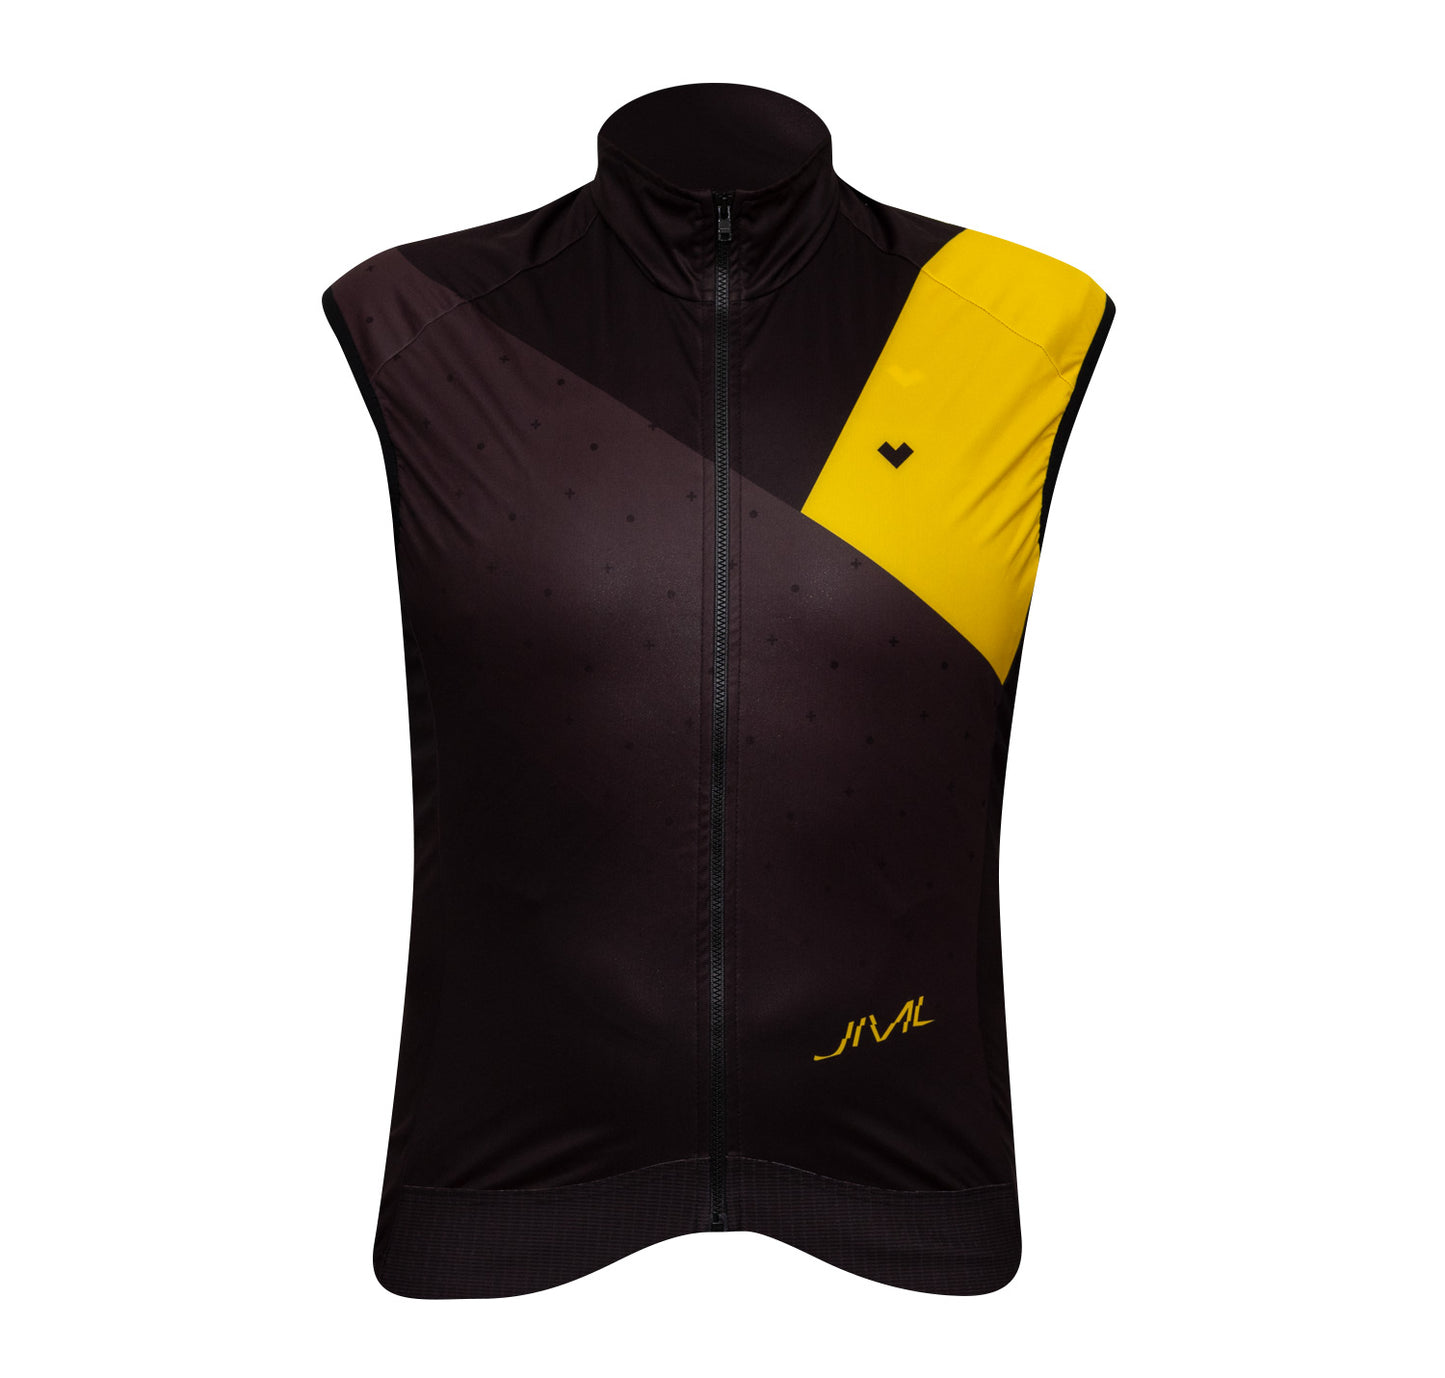 JML Triangle Vest freeshipping - Jerseys Made with Love